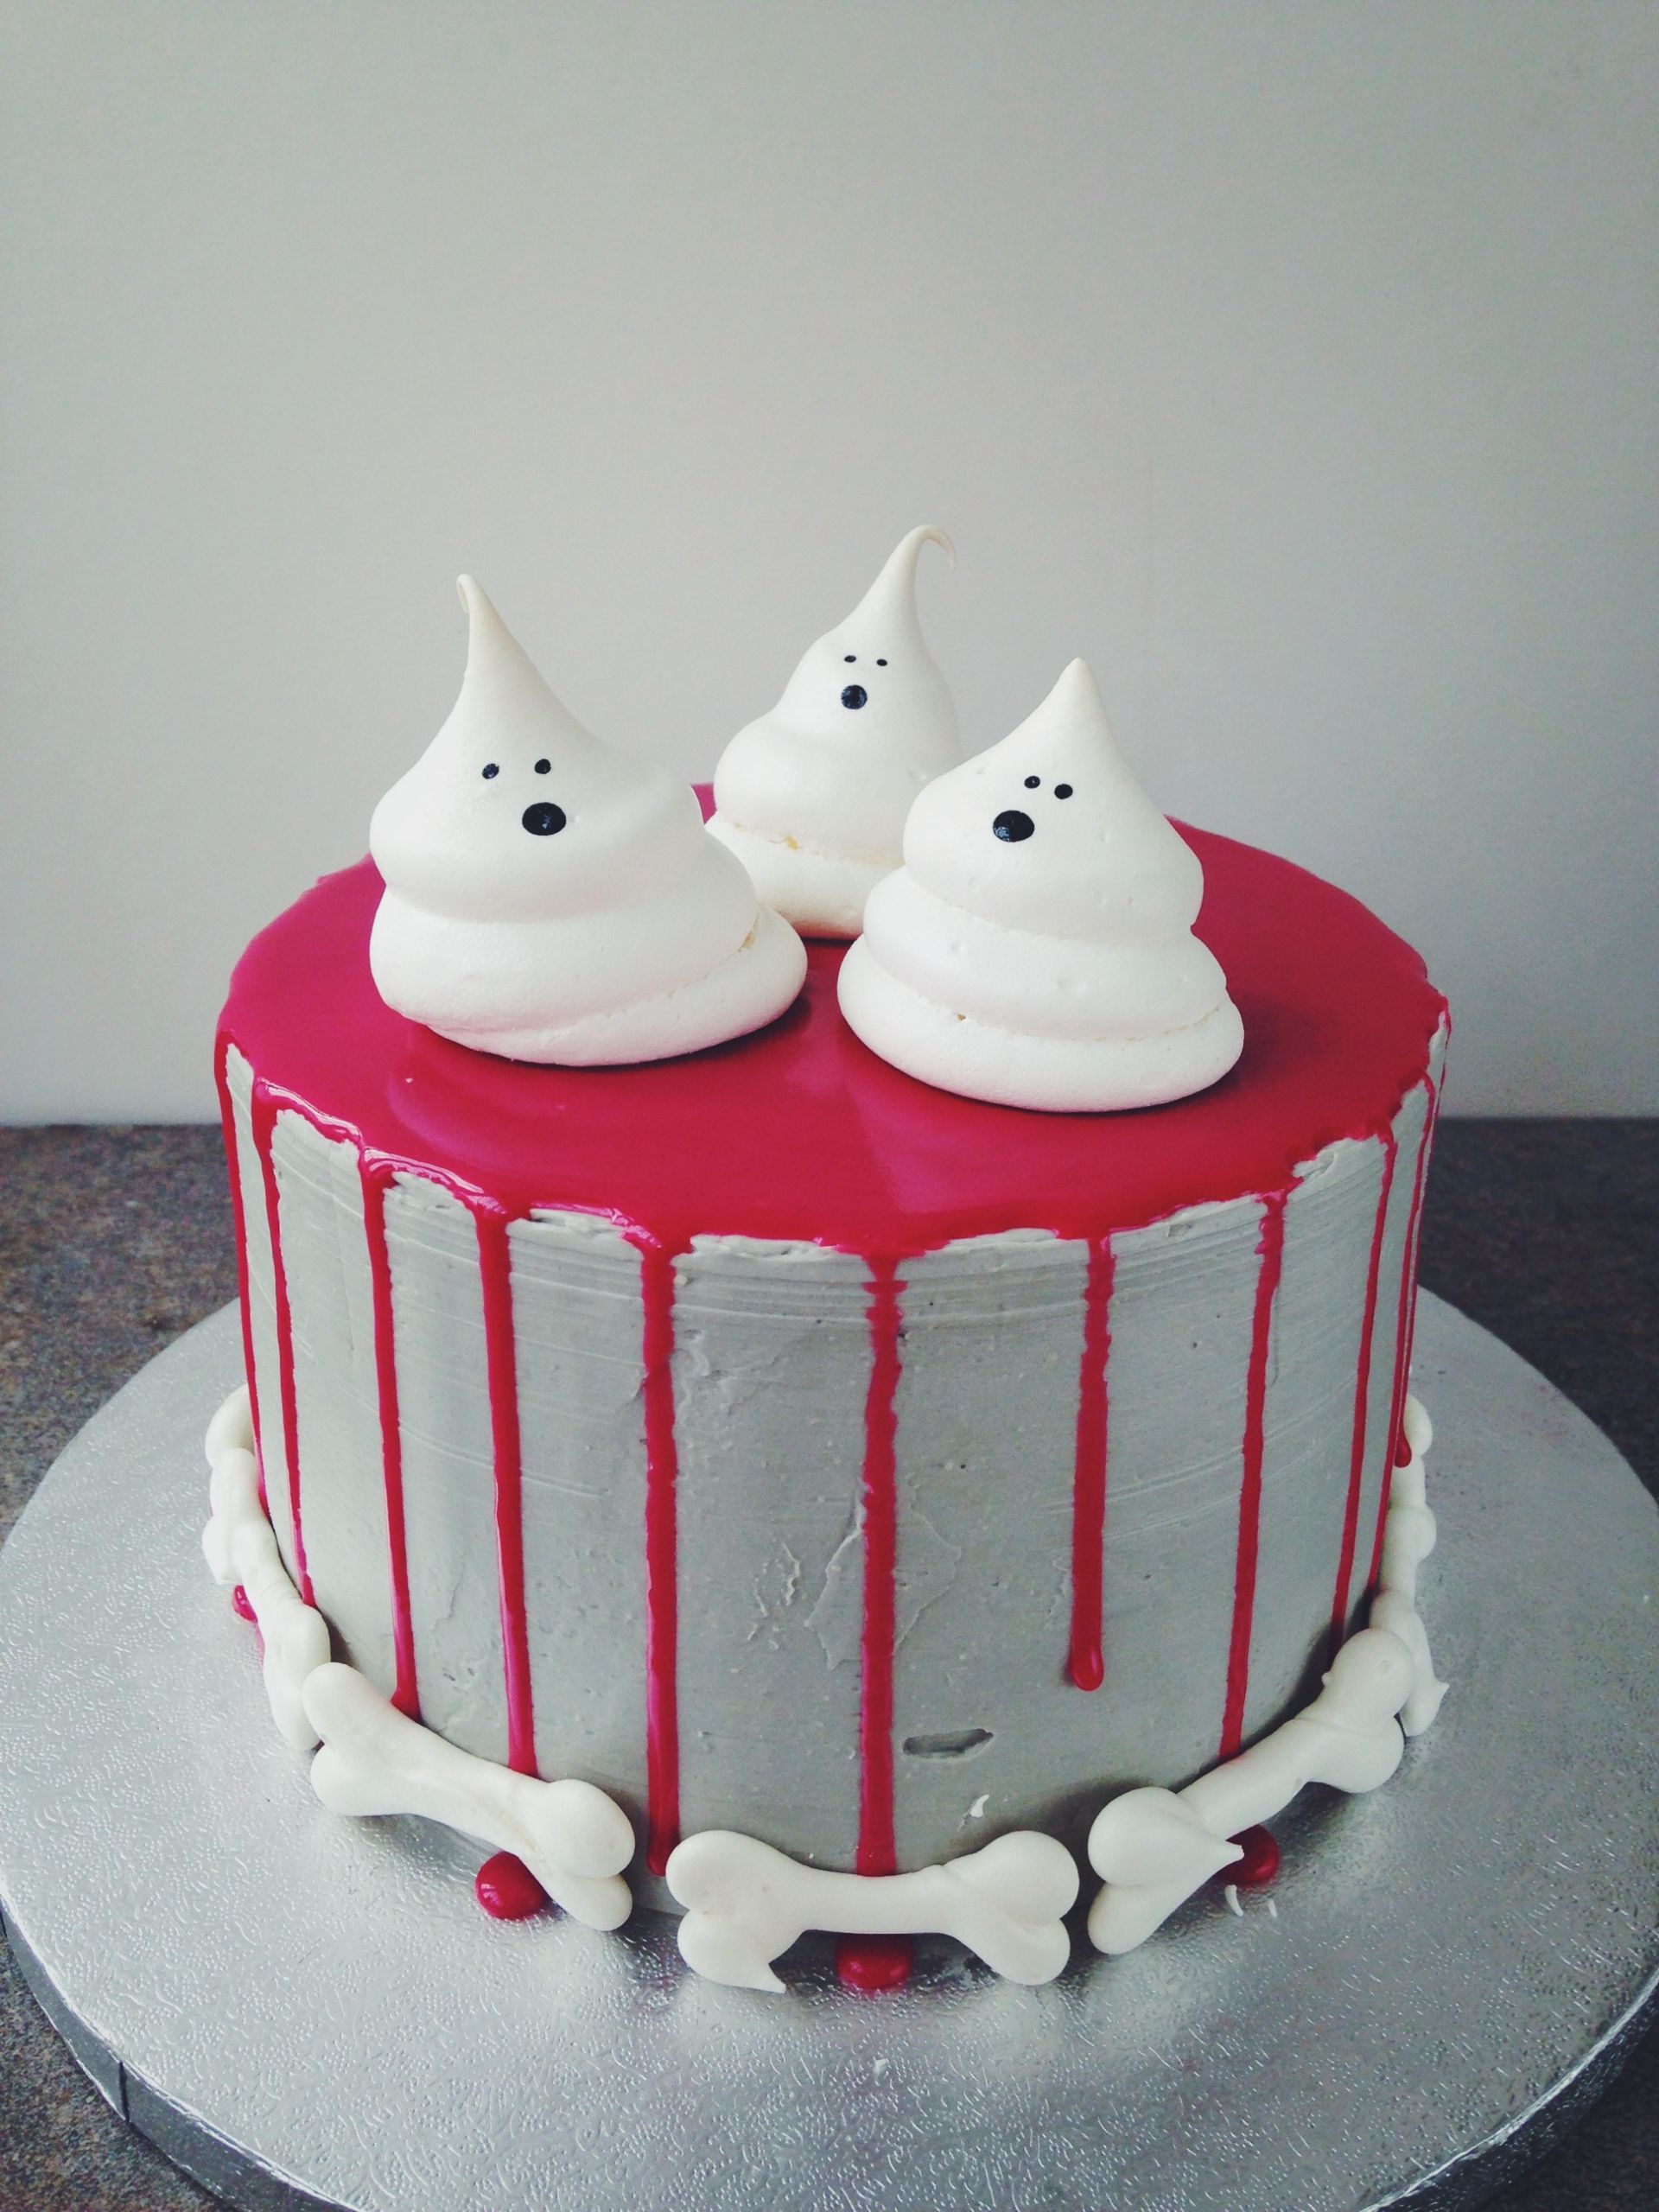 Scarey Halloween Cakes
 Spooky Halloween Blood Drip Cake with Meringue Ghosts and